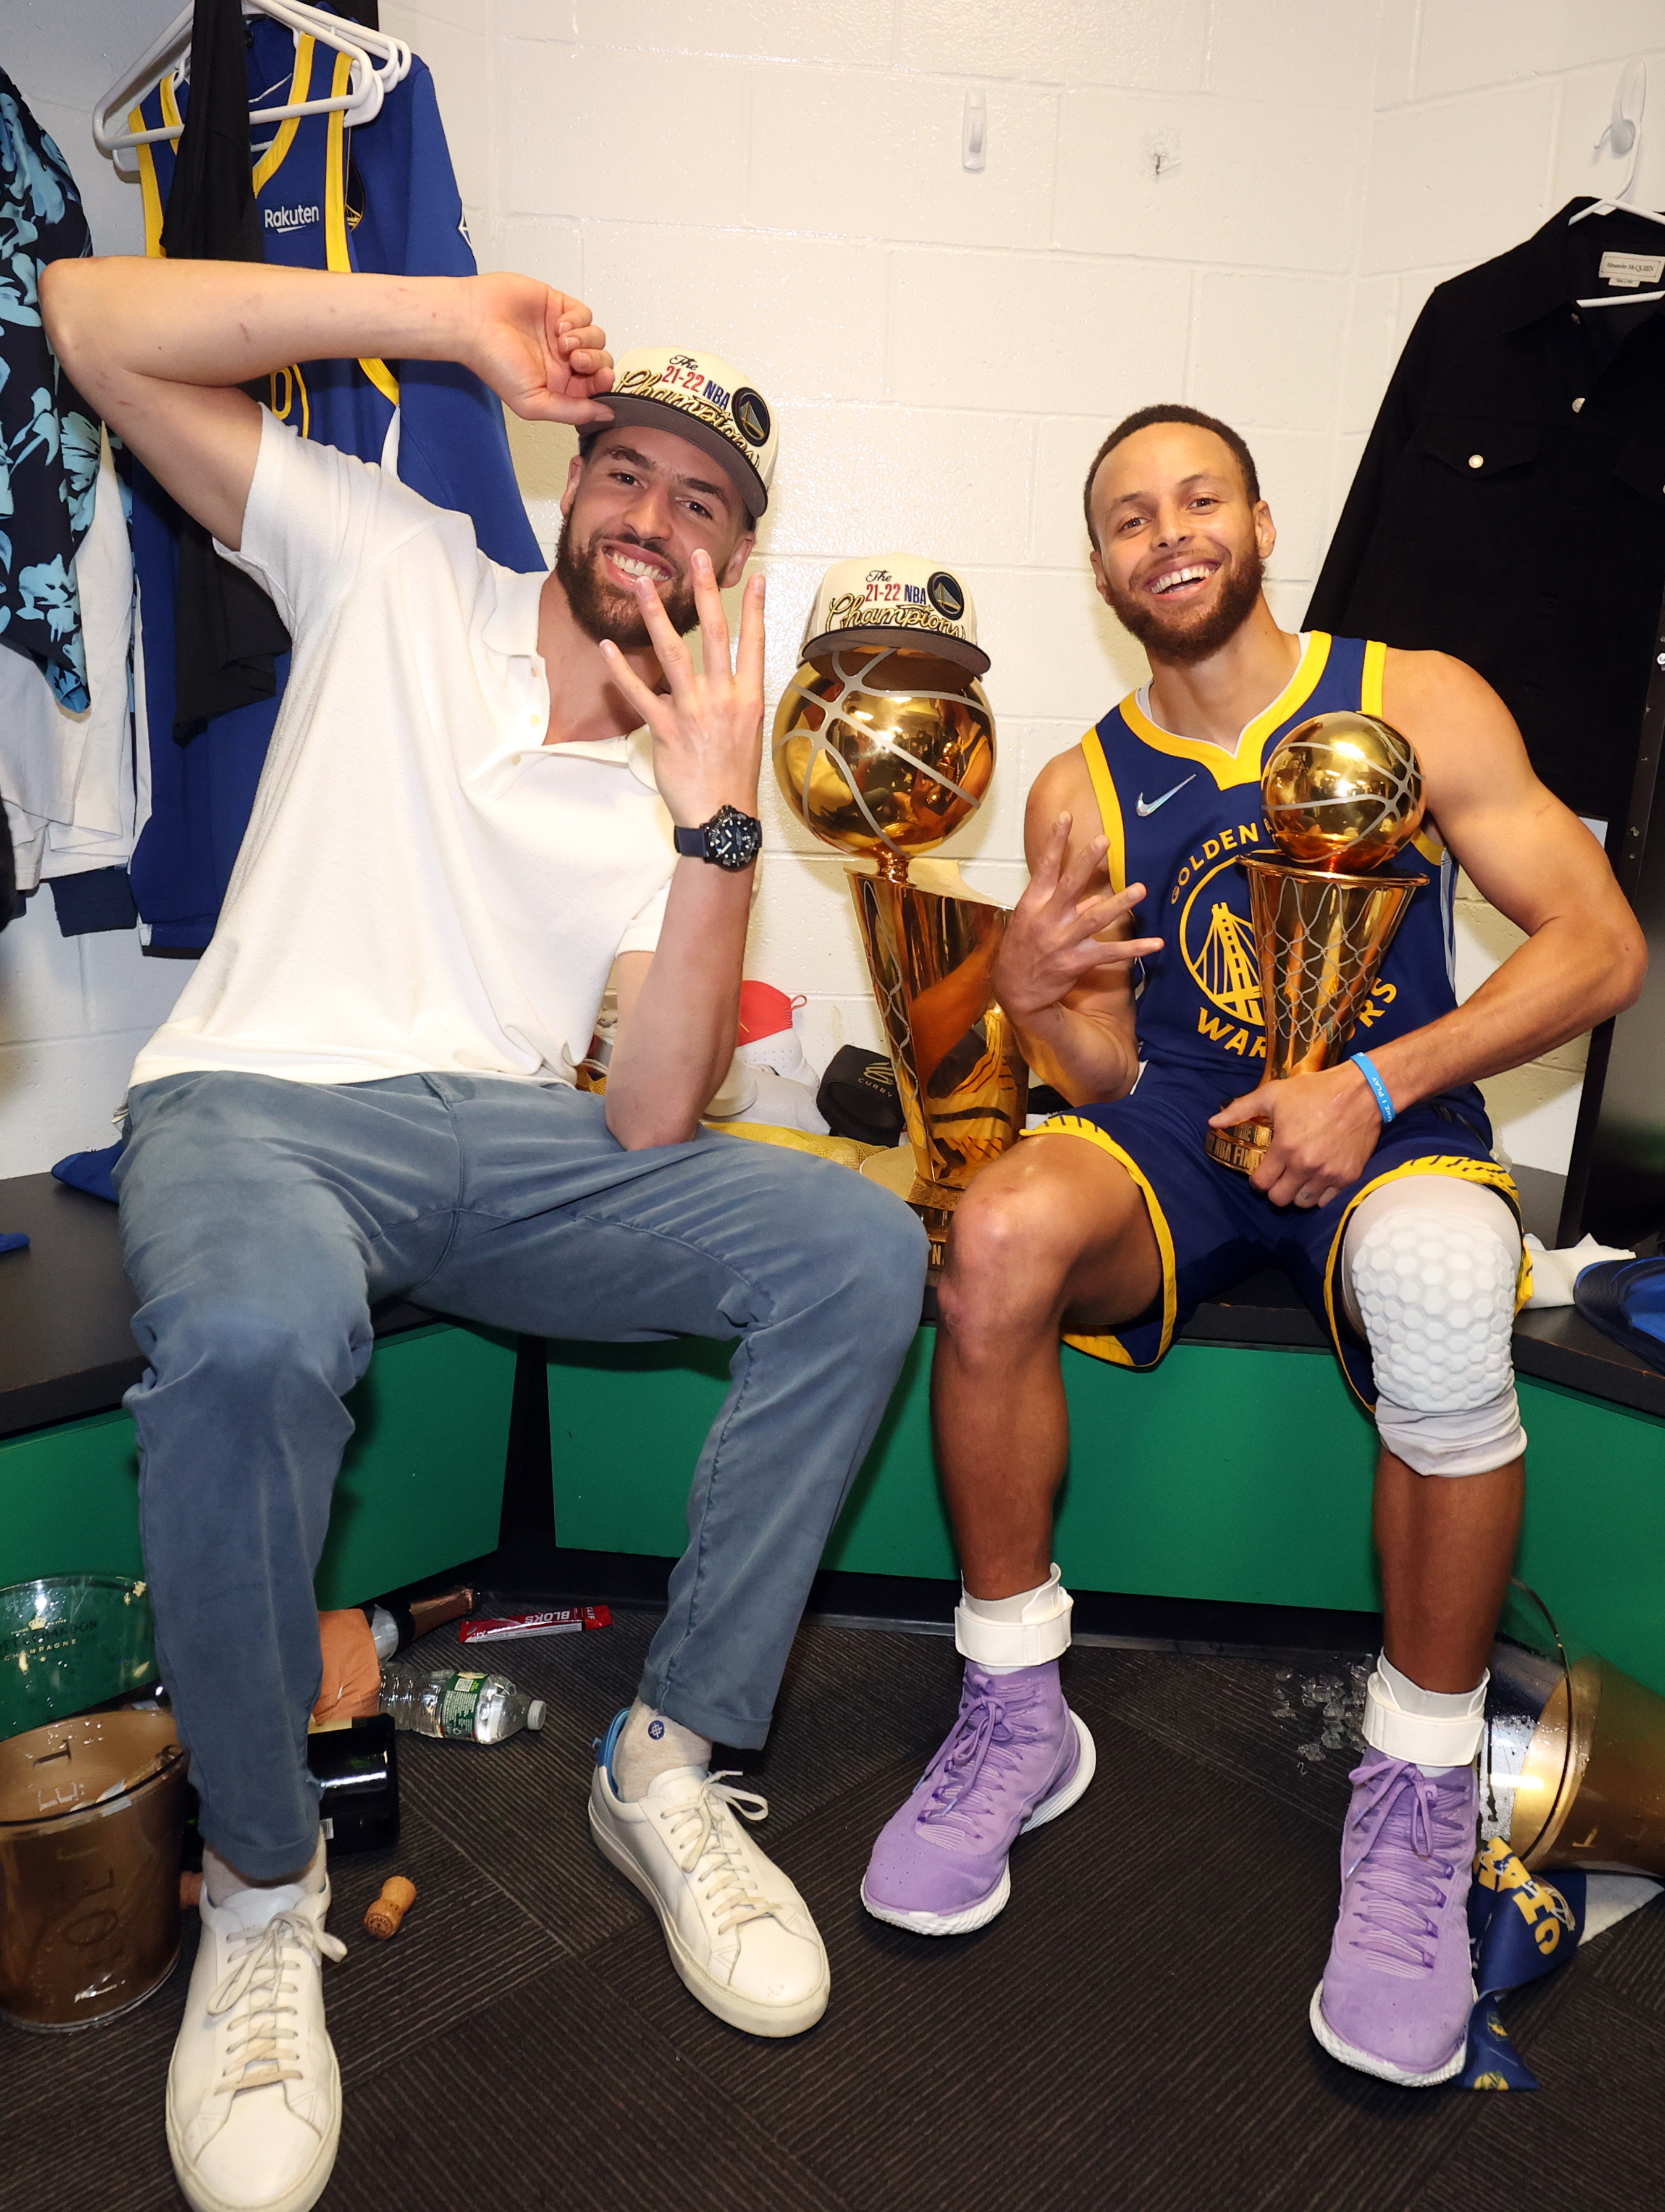 Steph Curry and Klay Thompson celebrating in the locker room